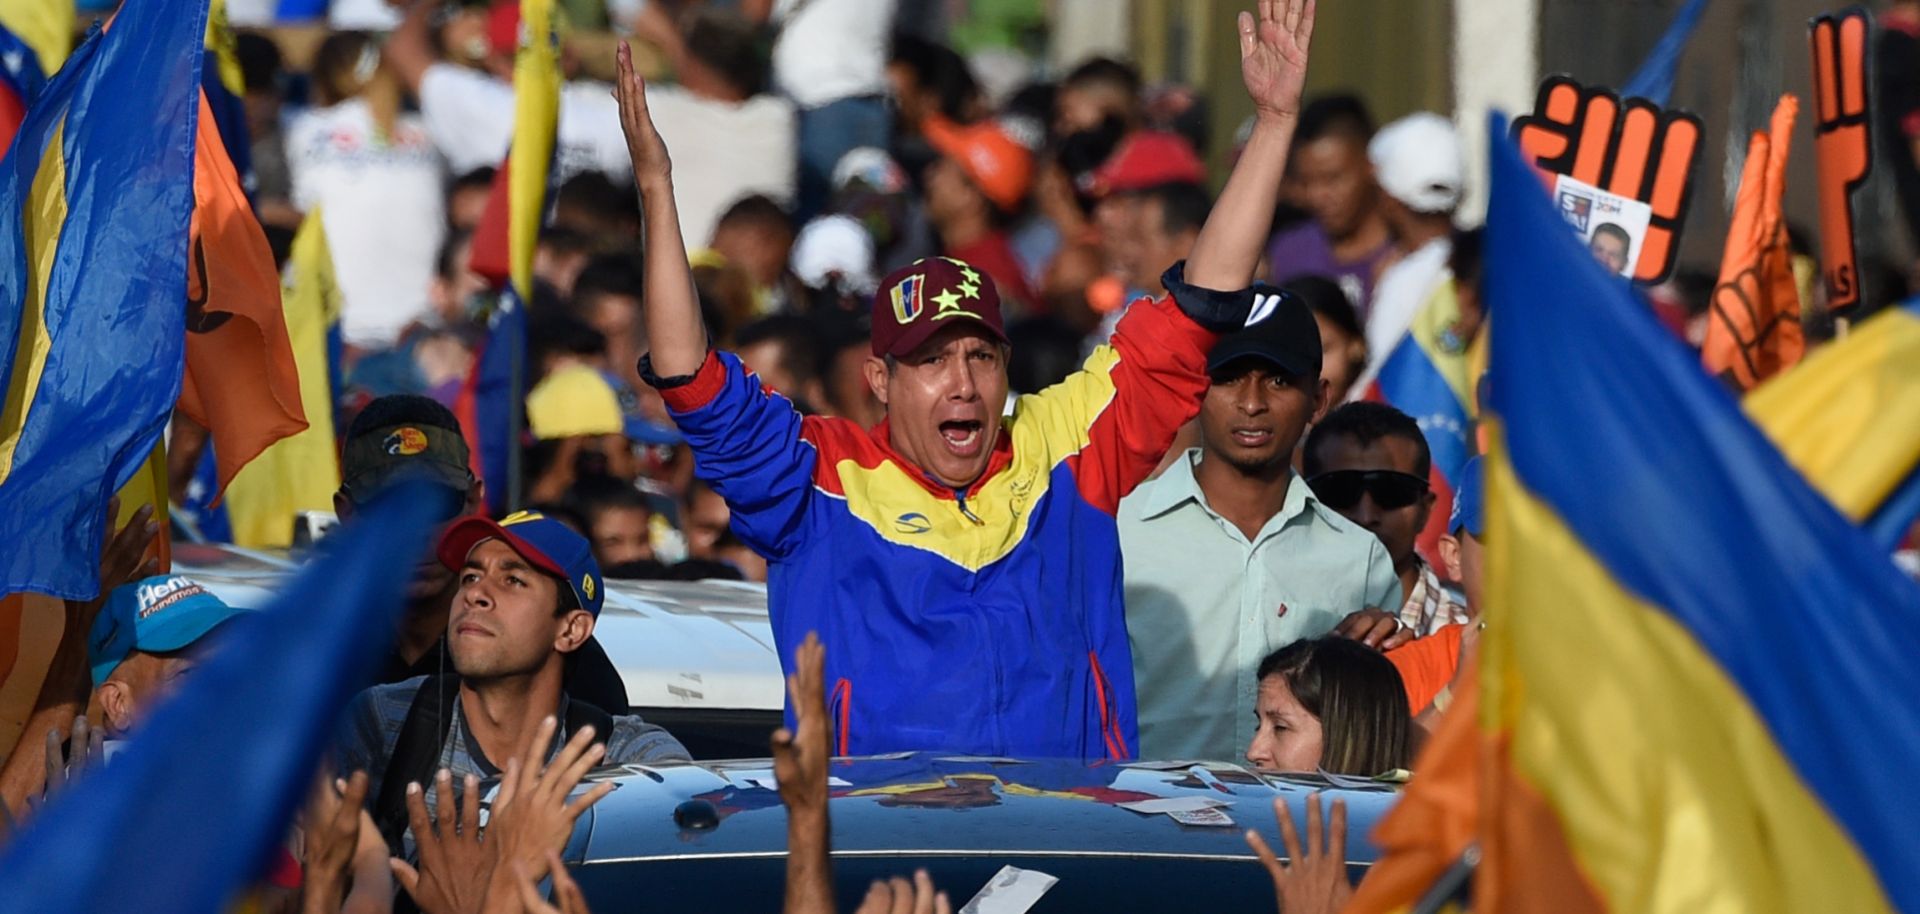 Henri Falcon, an opposition candidate in Venezuela's presidential elections, waves during the closing rally of his campaign ahead of the May 20 presidential election, which is largely expected to result in a win for the incumbent, President Nicolas Maduro.